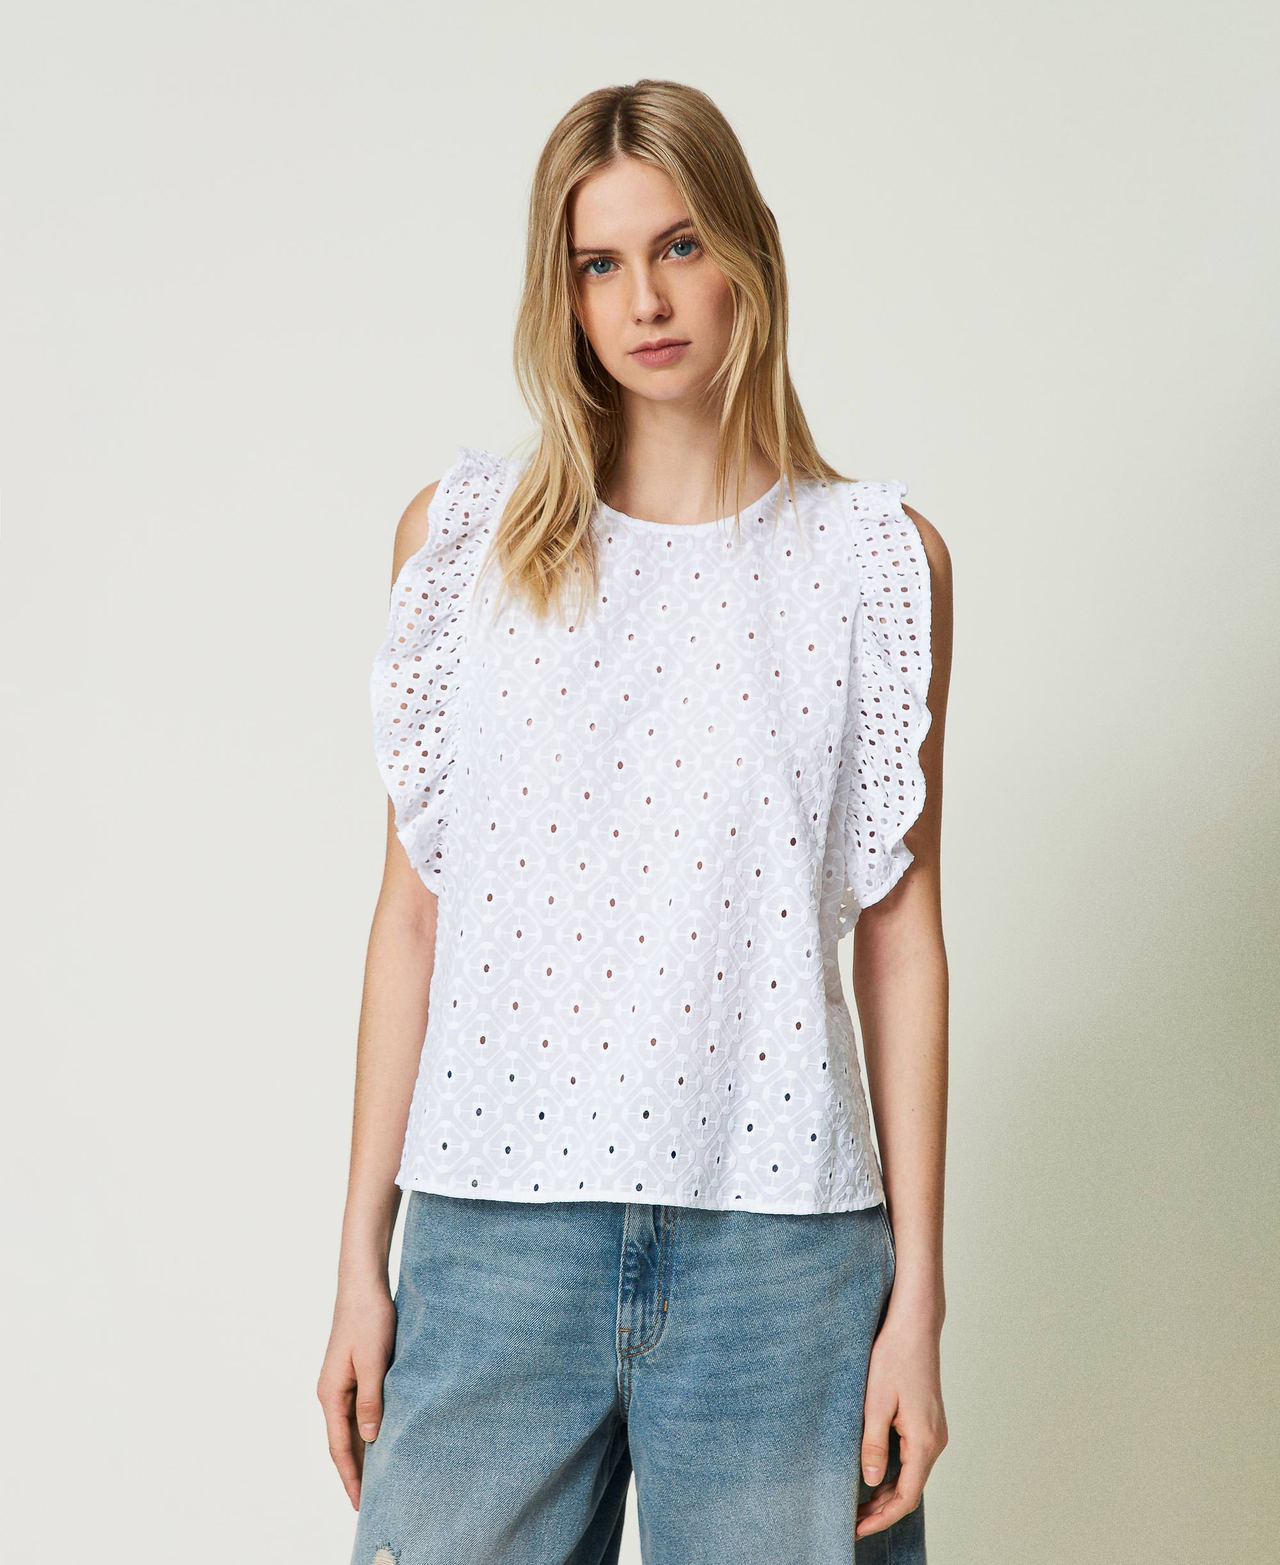 Top en broderie anglaise avec volant Rouge « Scarlet Ibis » Femme 241AT2070-02